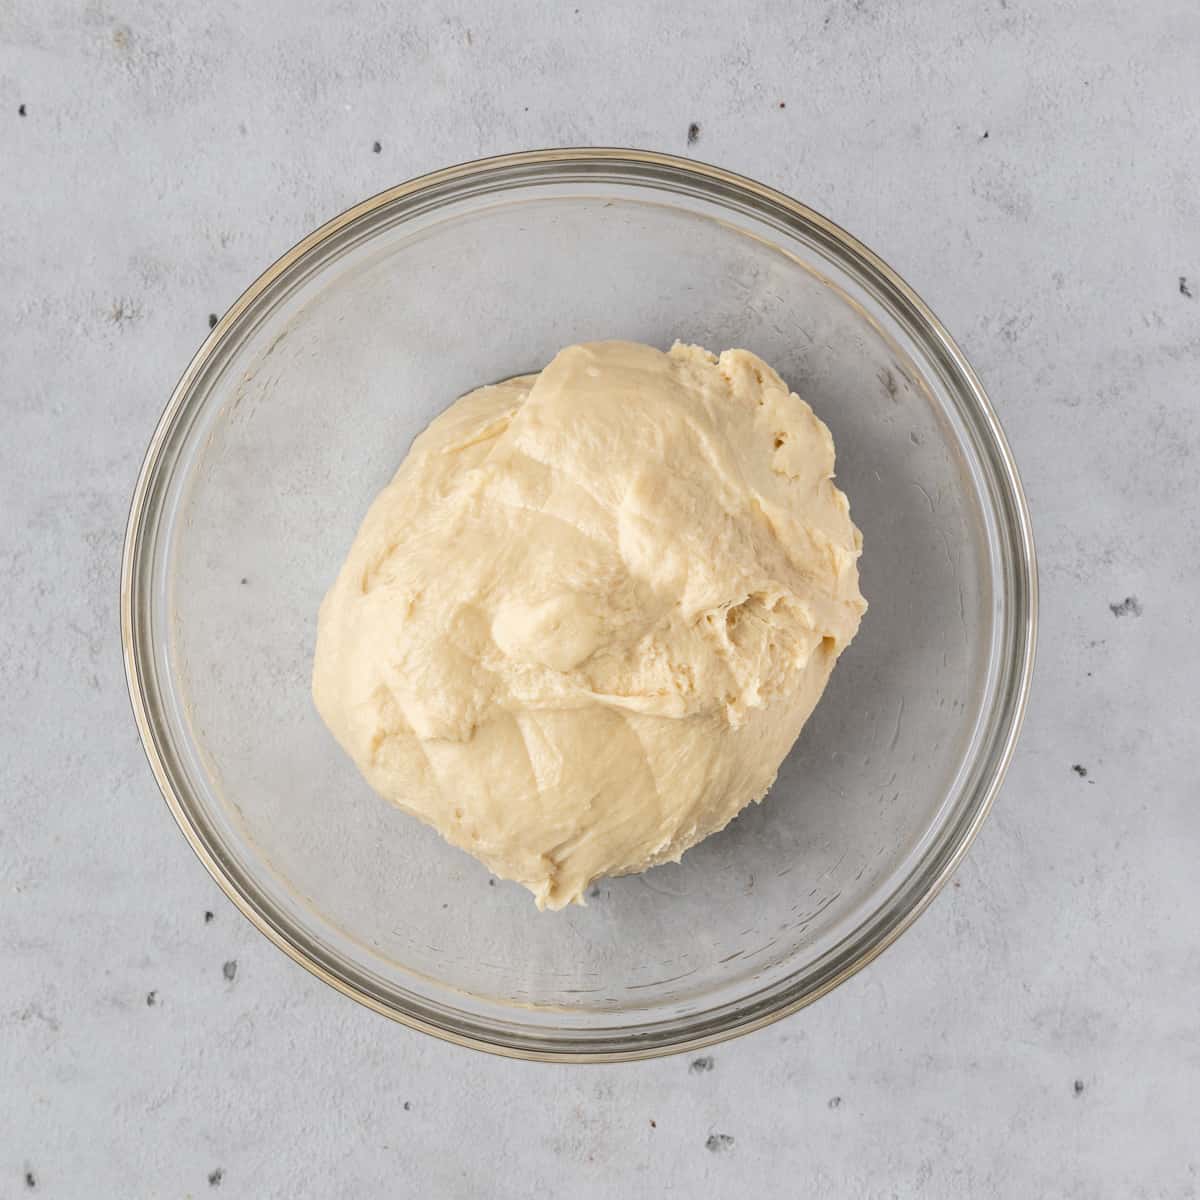 the cinnamon roll dough in a glass bowl before rising